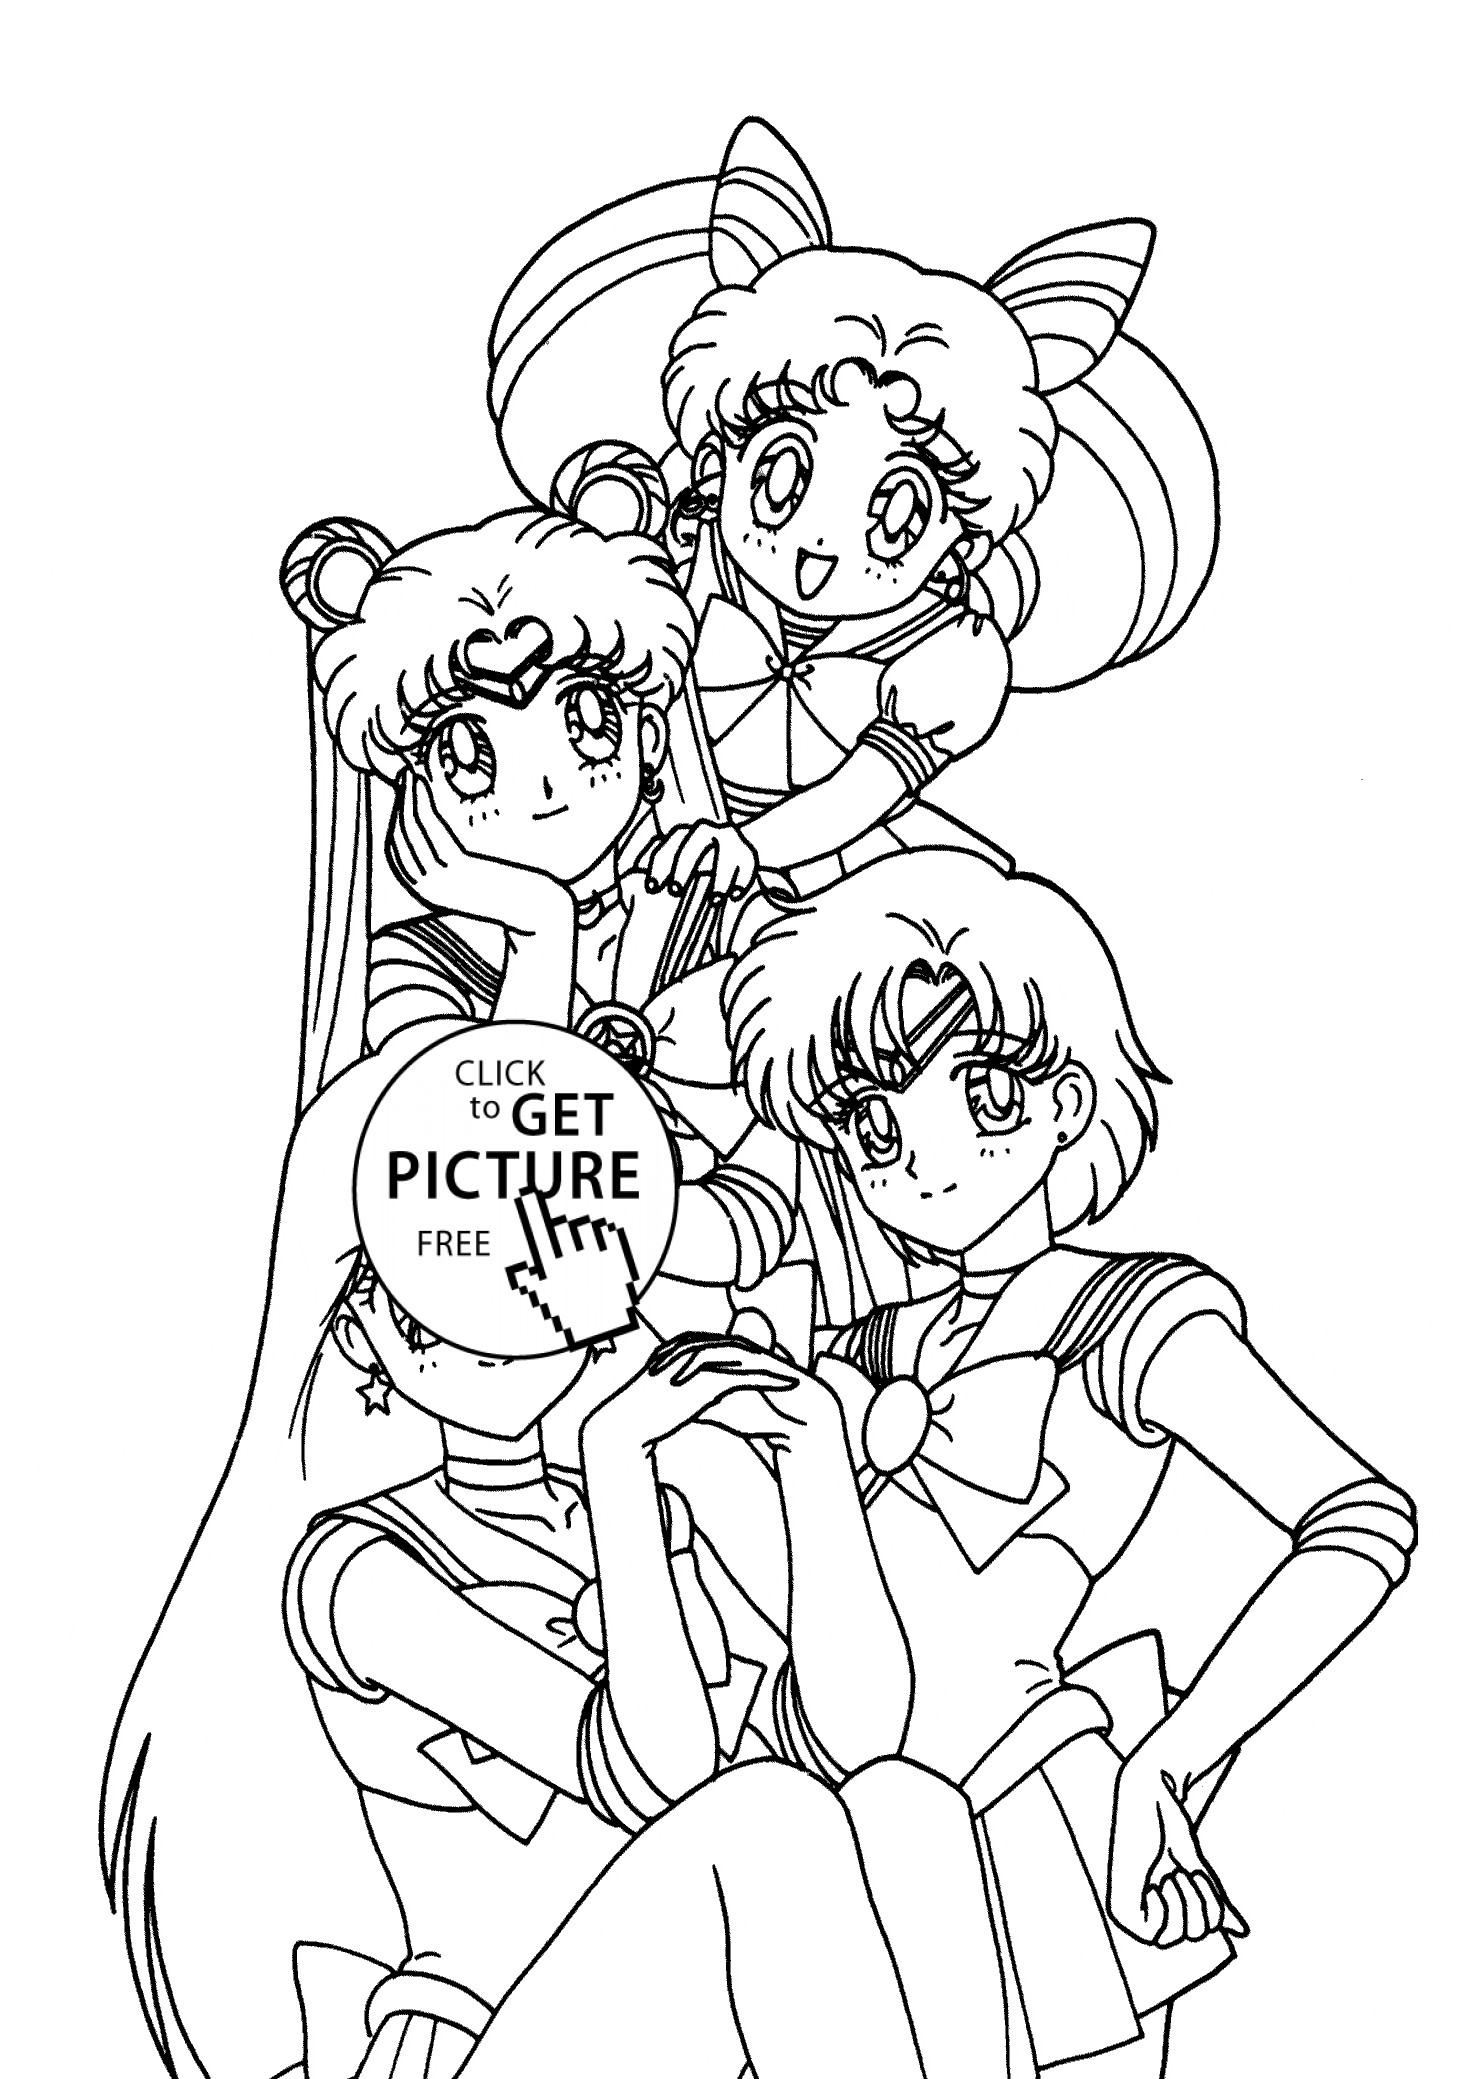 Manga Coloring Pages For Kids
 Sailor moon friends coloring pages for kids printable